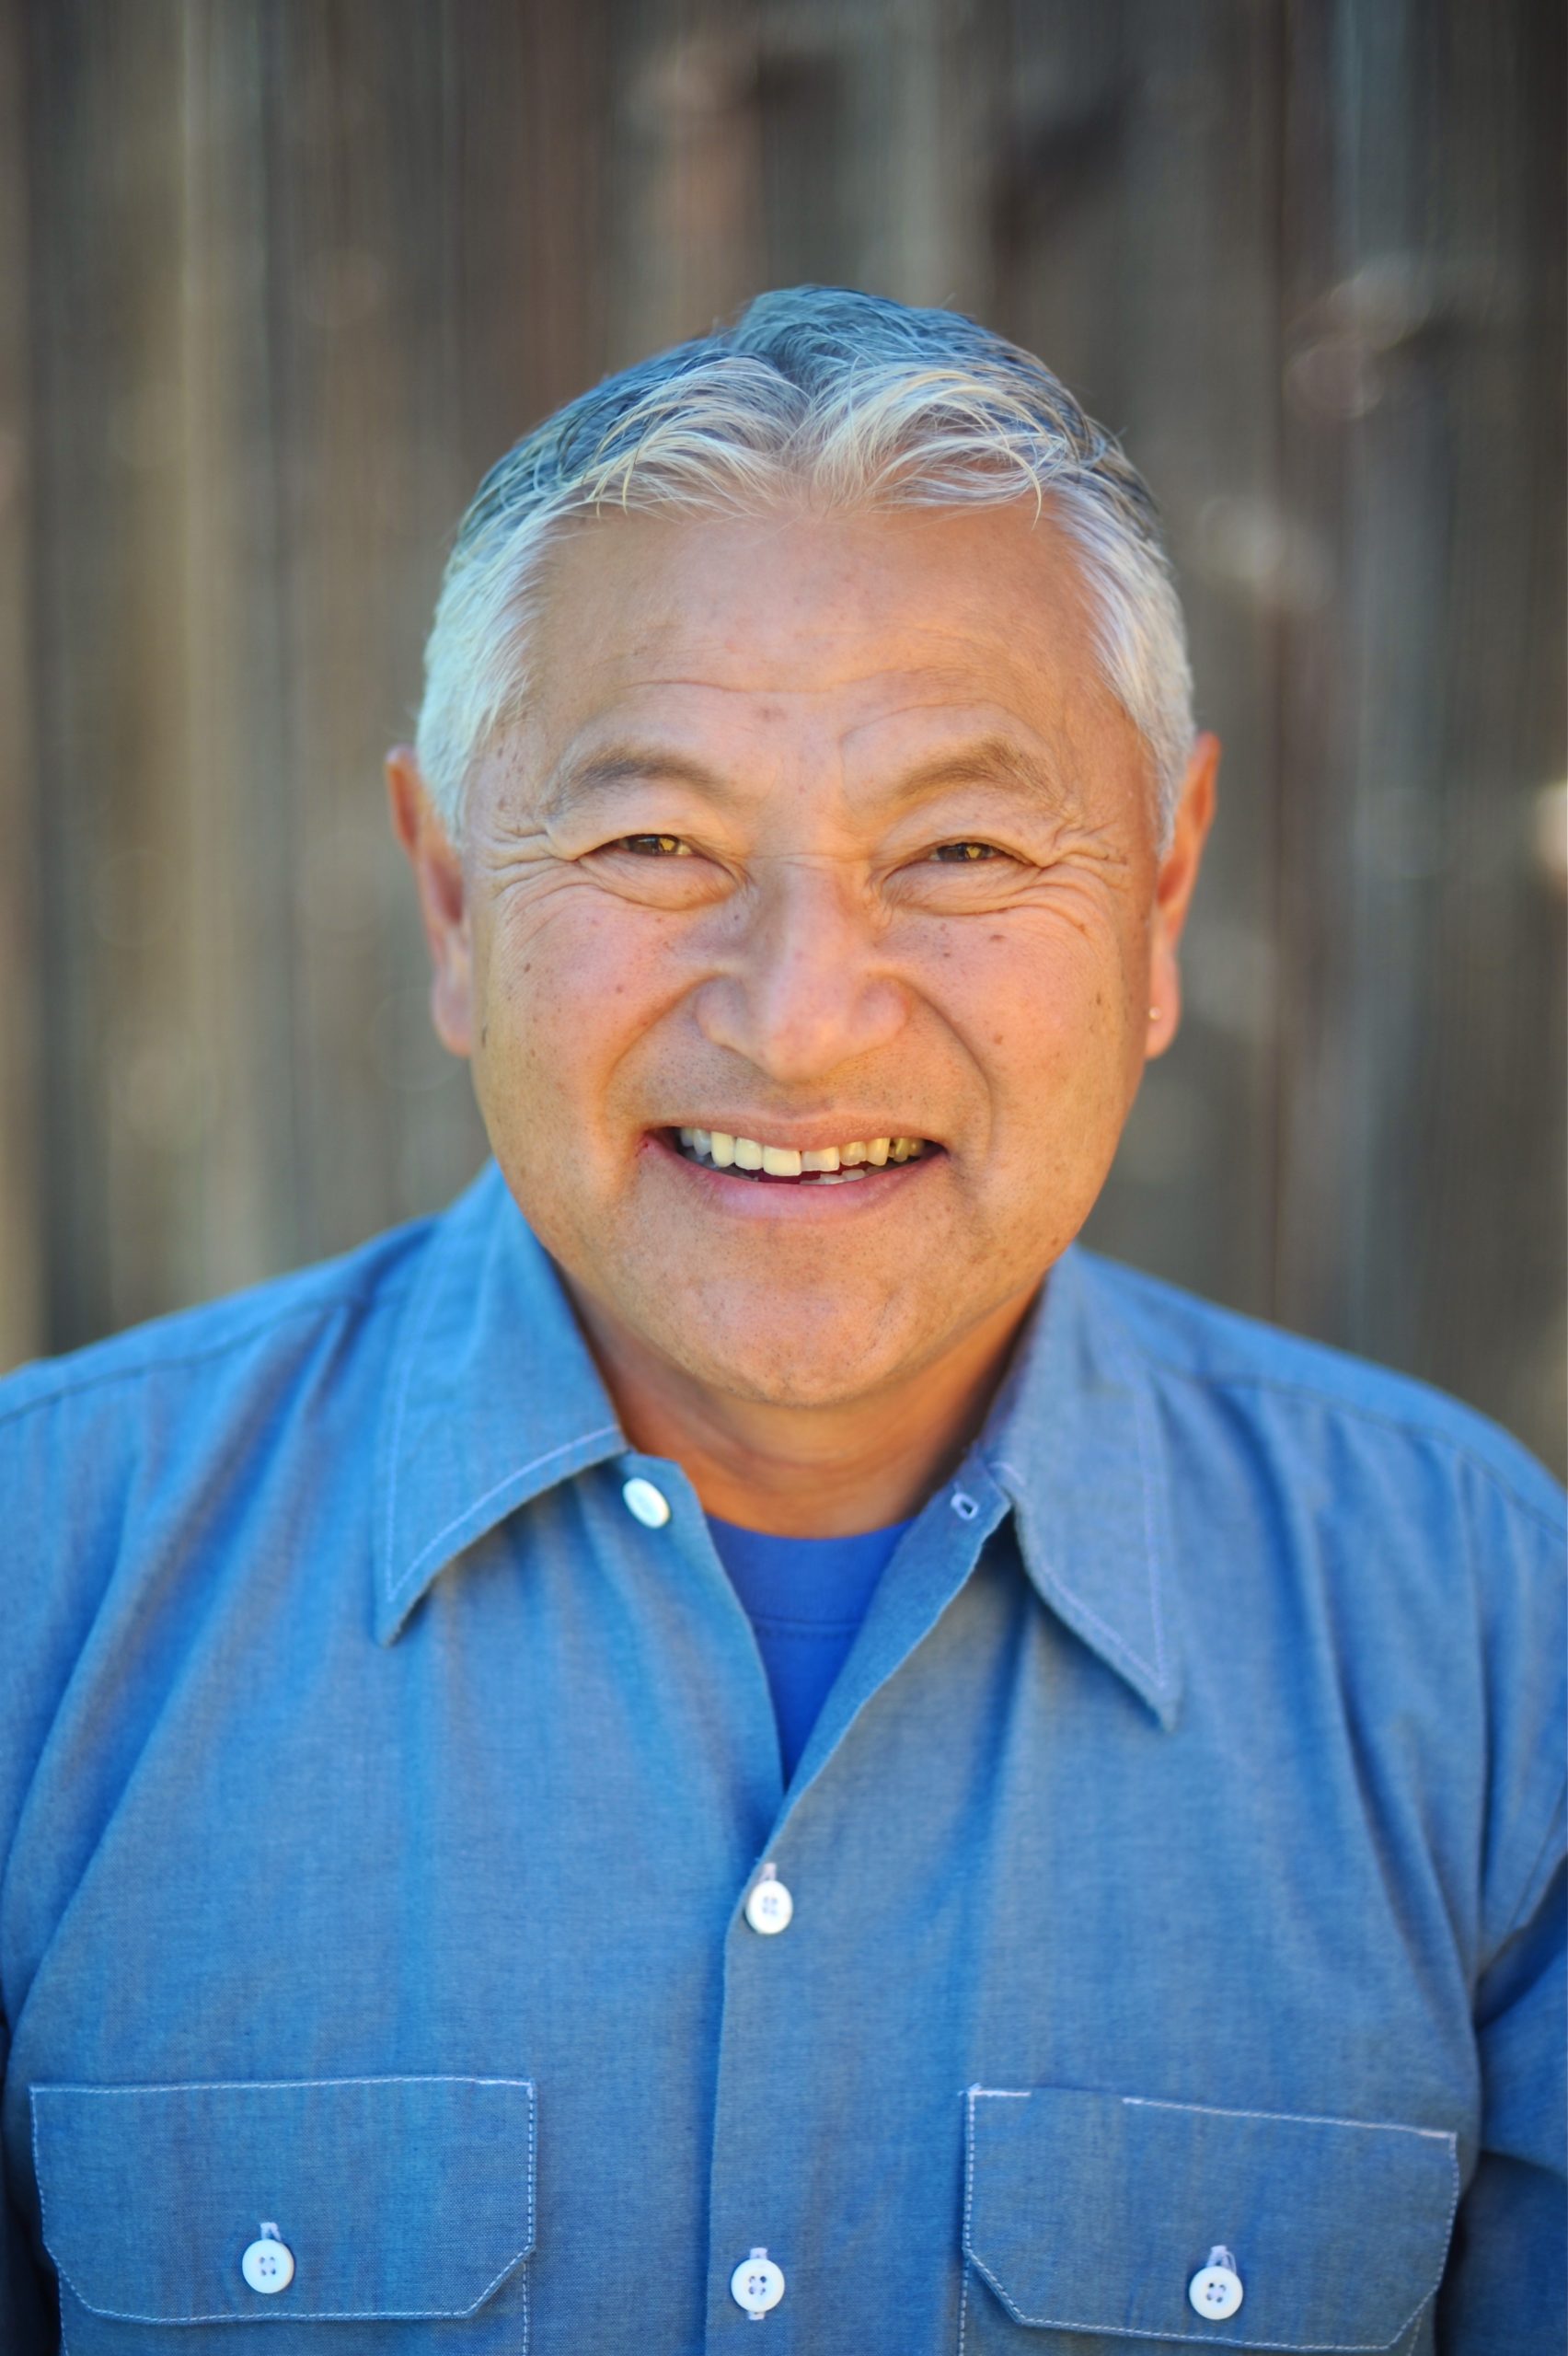 A man wearing a blue shirt smiles standing in front of a brown background